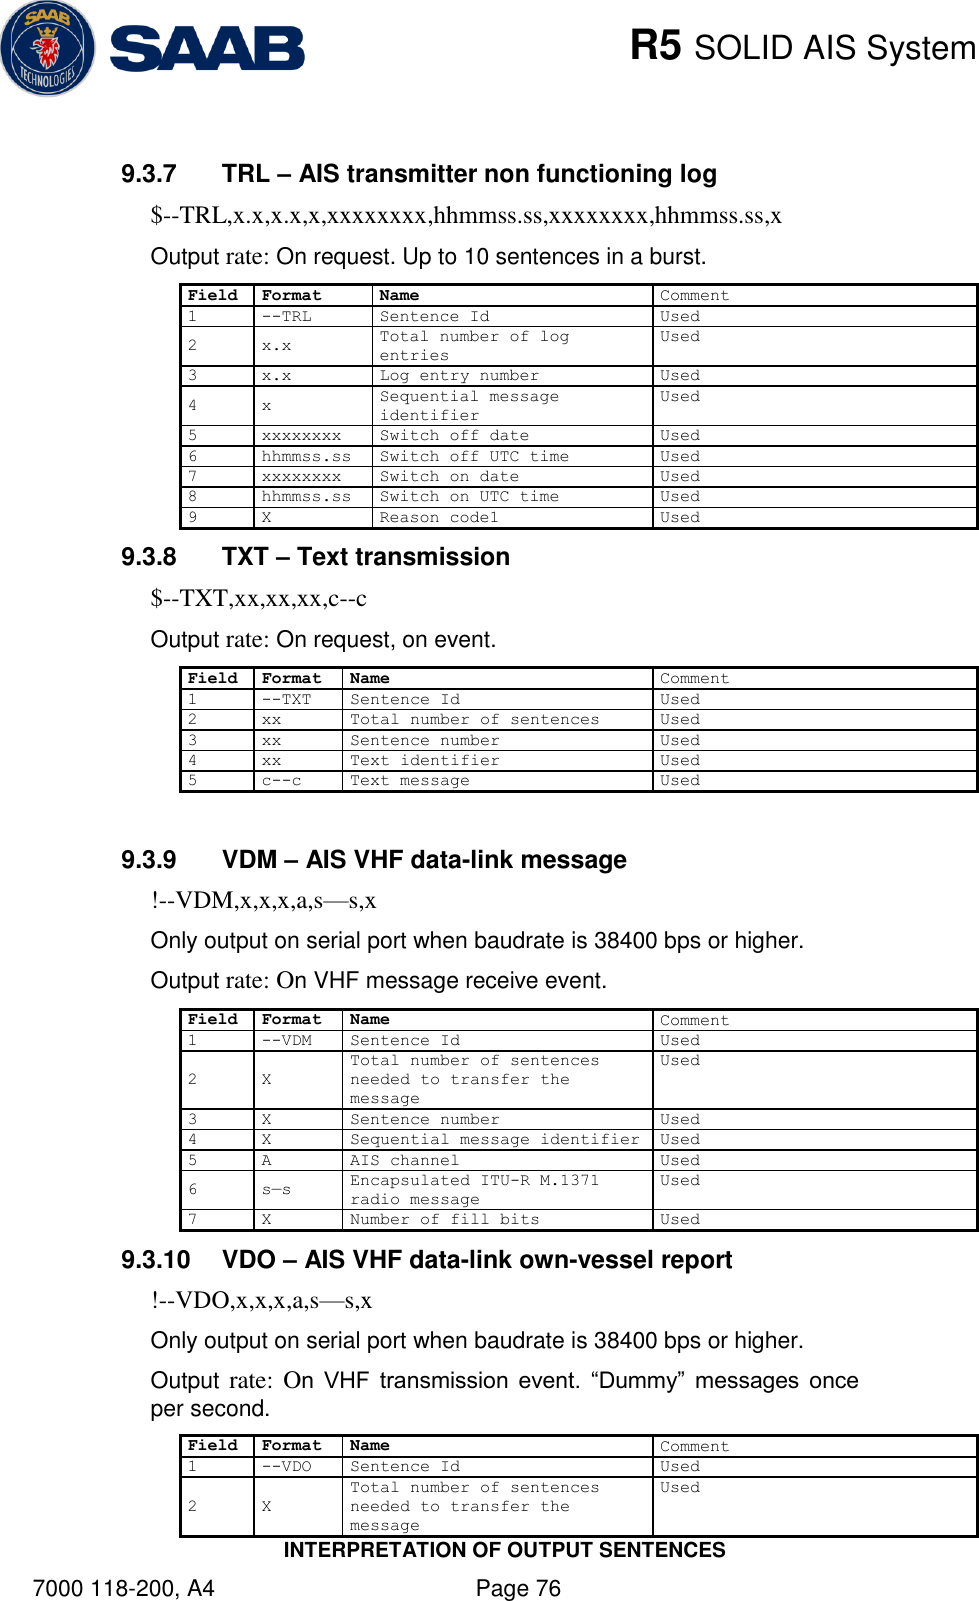    R5 SOLID AIS System INTERPRETATION OF OUTPUT SENTENCES 7000 118-200, A4    Page 76  9.3.7  TRL – AIS transmitter non functioning log $--TRL,x.x,x.x,x,xxxxxxxx,hhmmss.ss,xxxxxxxx,hhmmss.ss,x Output rate: On request. Up to 10 sentences in a burst. Field Format Name Comment 1 --TRL Sentence Id Used 2 x.x Total number of log entries Used 3 x.x Log entry number Used 4 x Sequential message identifier Used 5 xxxxxxxx Switch off date Used 6 hhmmss.ss Switch off UTC time Used 7 xxxxxxxx Switch on date Used 8 hhmmss.ss Switch on UTC time Used 9 X Reason code1 Used 9.3.8  TXT – Text transmission $--TXT,xx,xx,xx,c--c Output rate: On request, on event. Field Format Name Comment 1 --TXT Sentence Id Used 2 xx Total number of sentences Used 3 xx Sentence number Used 4 xx Text identifier Used 5 c--c Text message Used  9.3.9  VDM – AIS VHF data-link message !--VDM,x,x,x,a,s—s,x Only output on serial port when baudrate is 38400 bps or higher. Output rate: On VHF message receive event. Field Format Name Comment 1 --VDM Sentence Id Used 2 X Total number of sentences needed to transfer the message Used 3 X Sentence number Used 4 X Sequential message identifier Used 5 A AIS channel Used 6 s—s Encapsulated ITU-R M.1371 radio message Used 7 X Number of fill bits Used 9.3.10  VDO – AIS VHF data-link own-vessel report !--VDO,x,x,x,a,s—s,x Only output on serial port when baudrate is 38400 bps or higher. Output rate: On  VHF  transmission  event.  “Dummy”  messages  once per second. Field Format Name Comment 1 --VDO Sentence Id Used 2 X Total number of sentences needed to transfer the message Used 